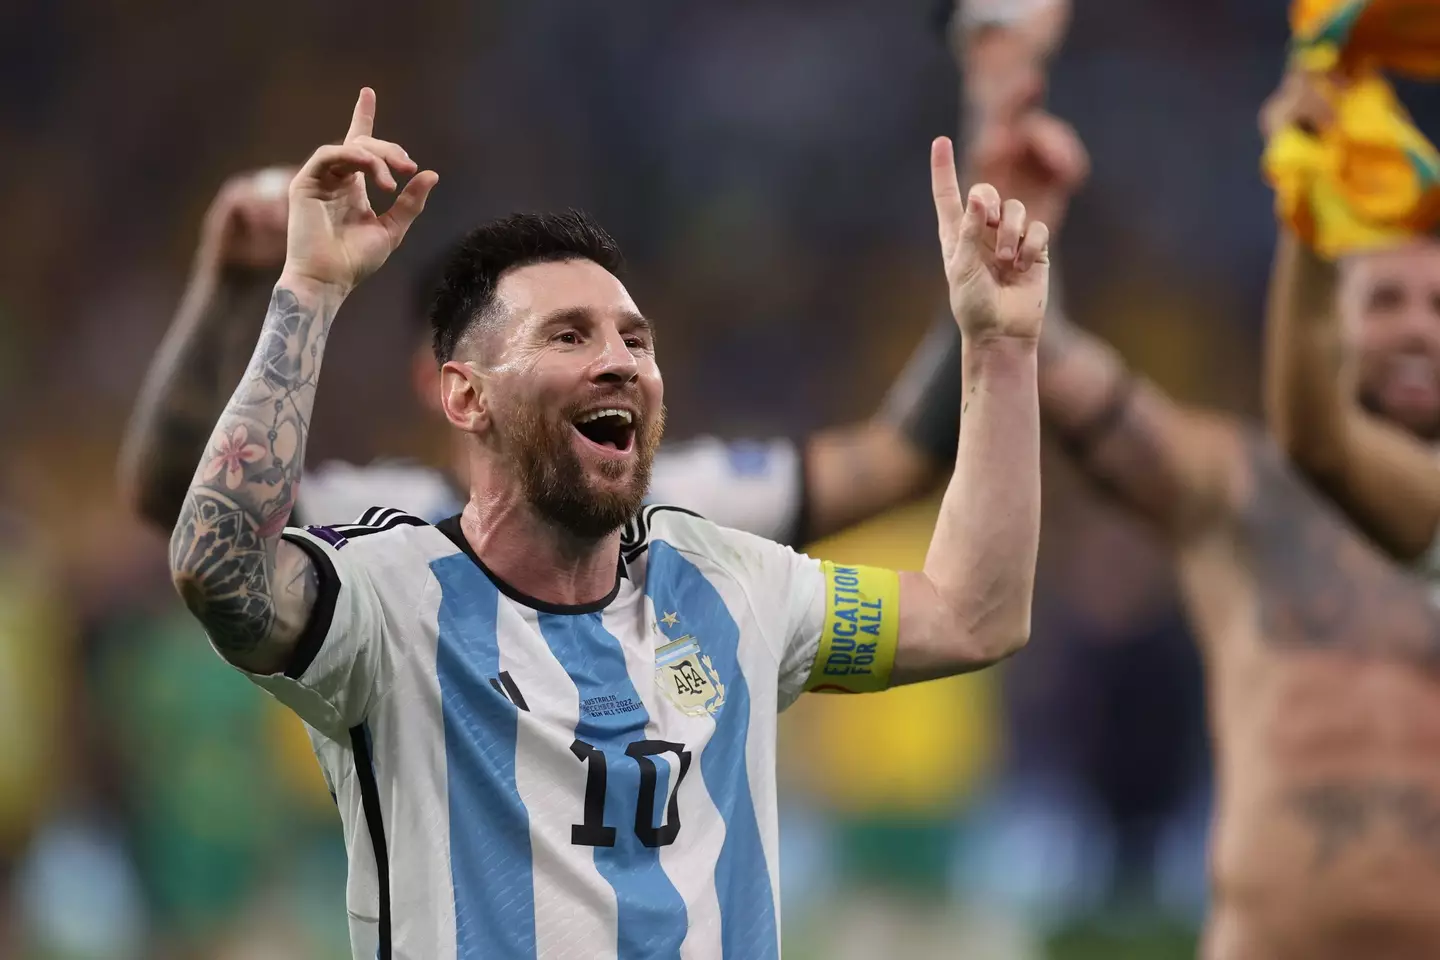 Mexican politician Maria Clemente Garcia Moreno wants Argentina skipper Lionel Messi barred from her country.